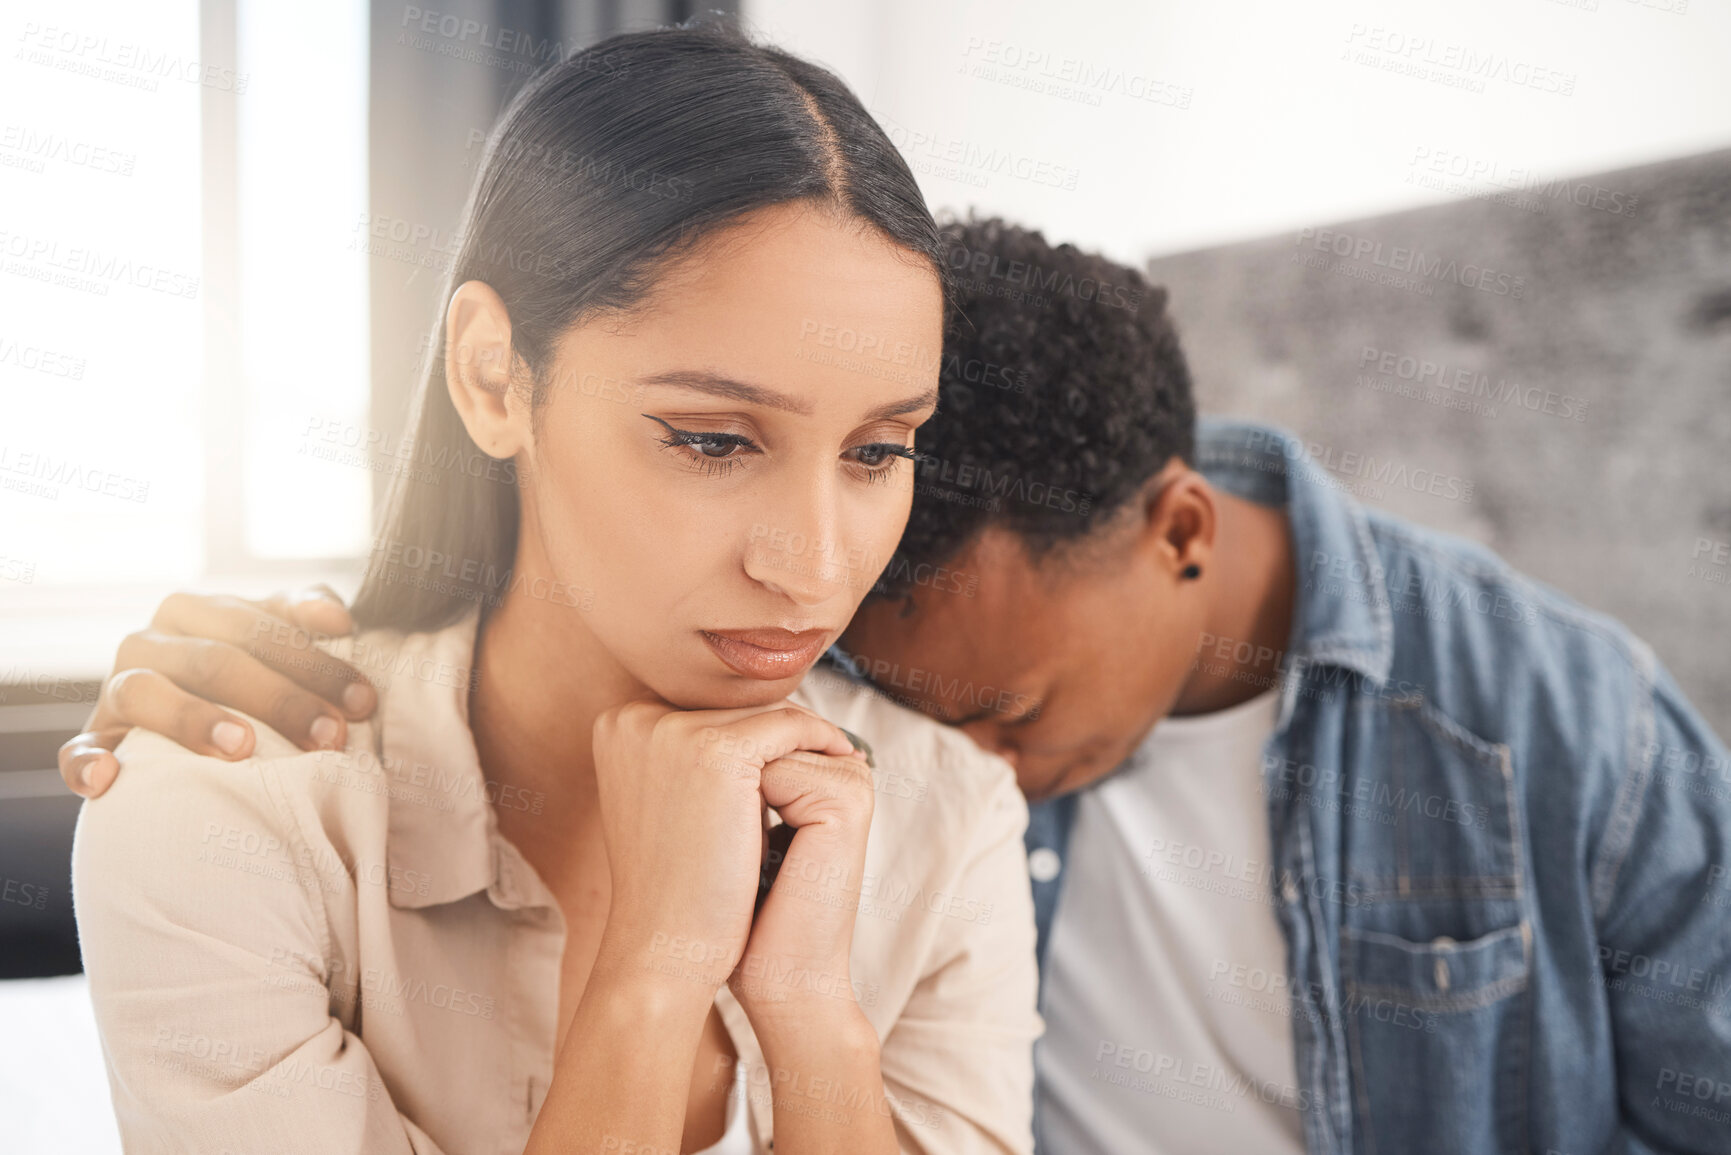 Buy stock photo Upset couple fighting, arguing or breaking up while sitting on their bed in the bedroom at home. Sad man crying on the shoulder of his thinking wife while talking about divorce or difficult problems.